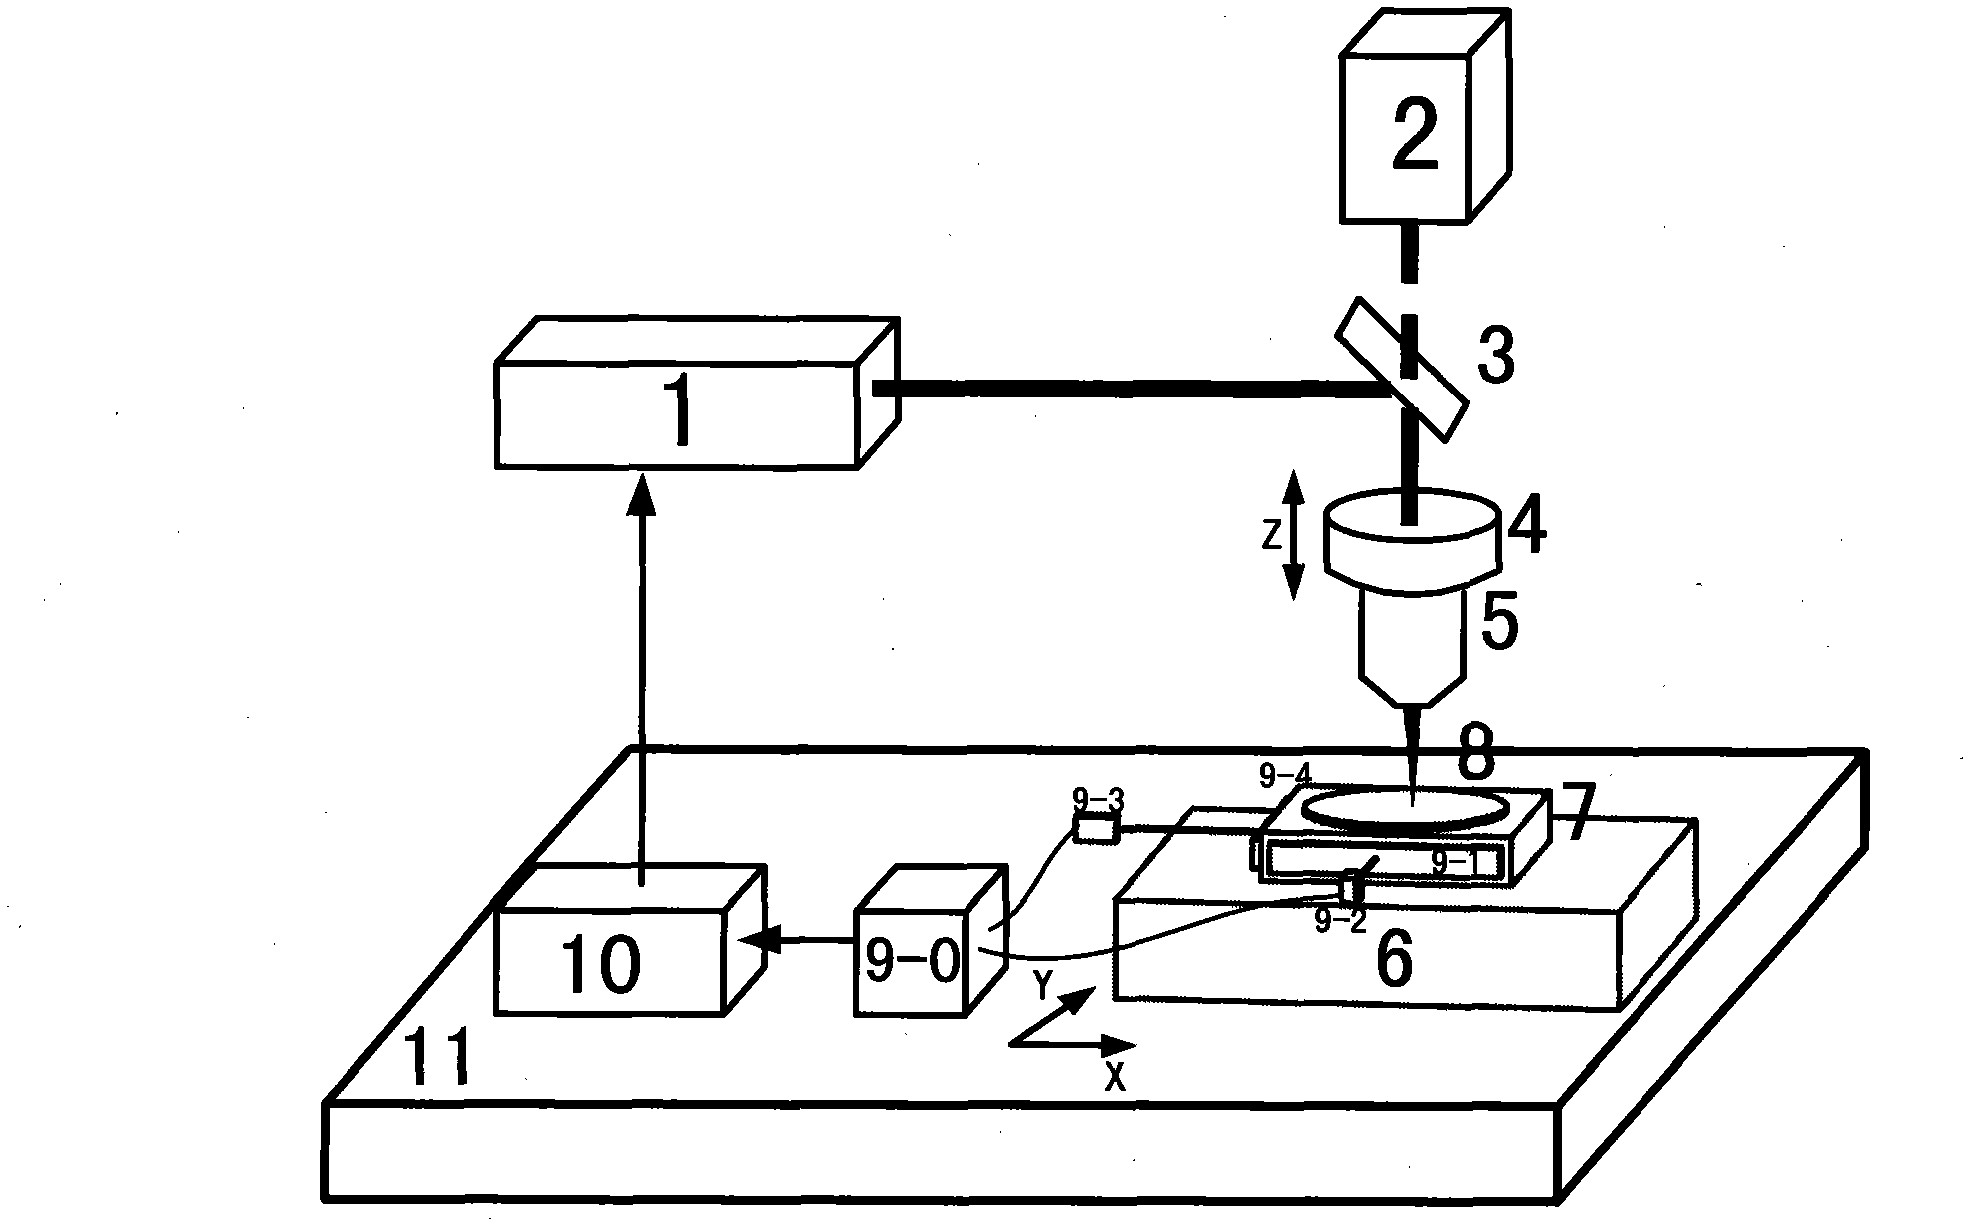 Laser direct-writing device